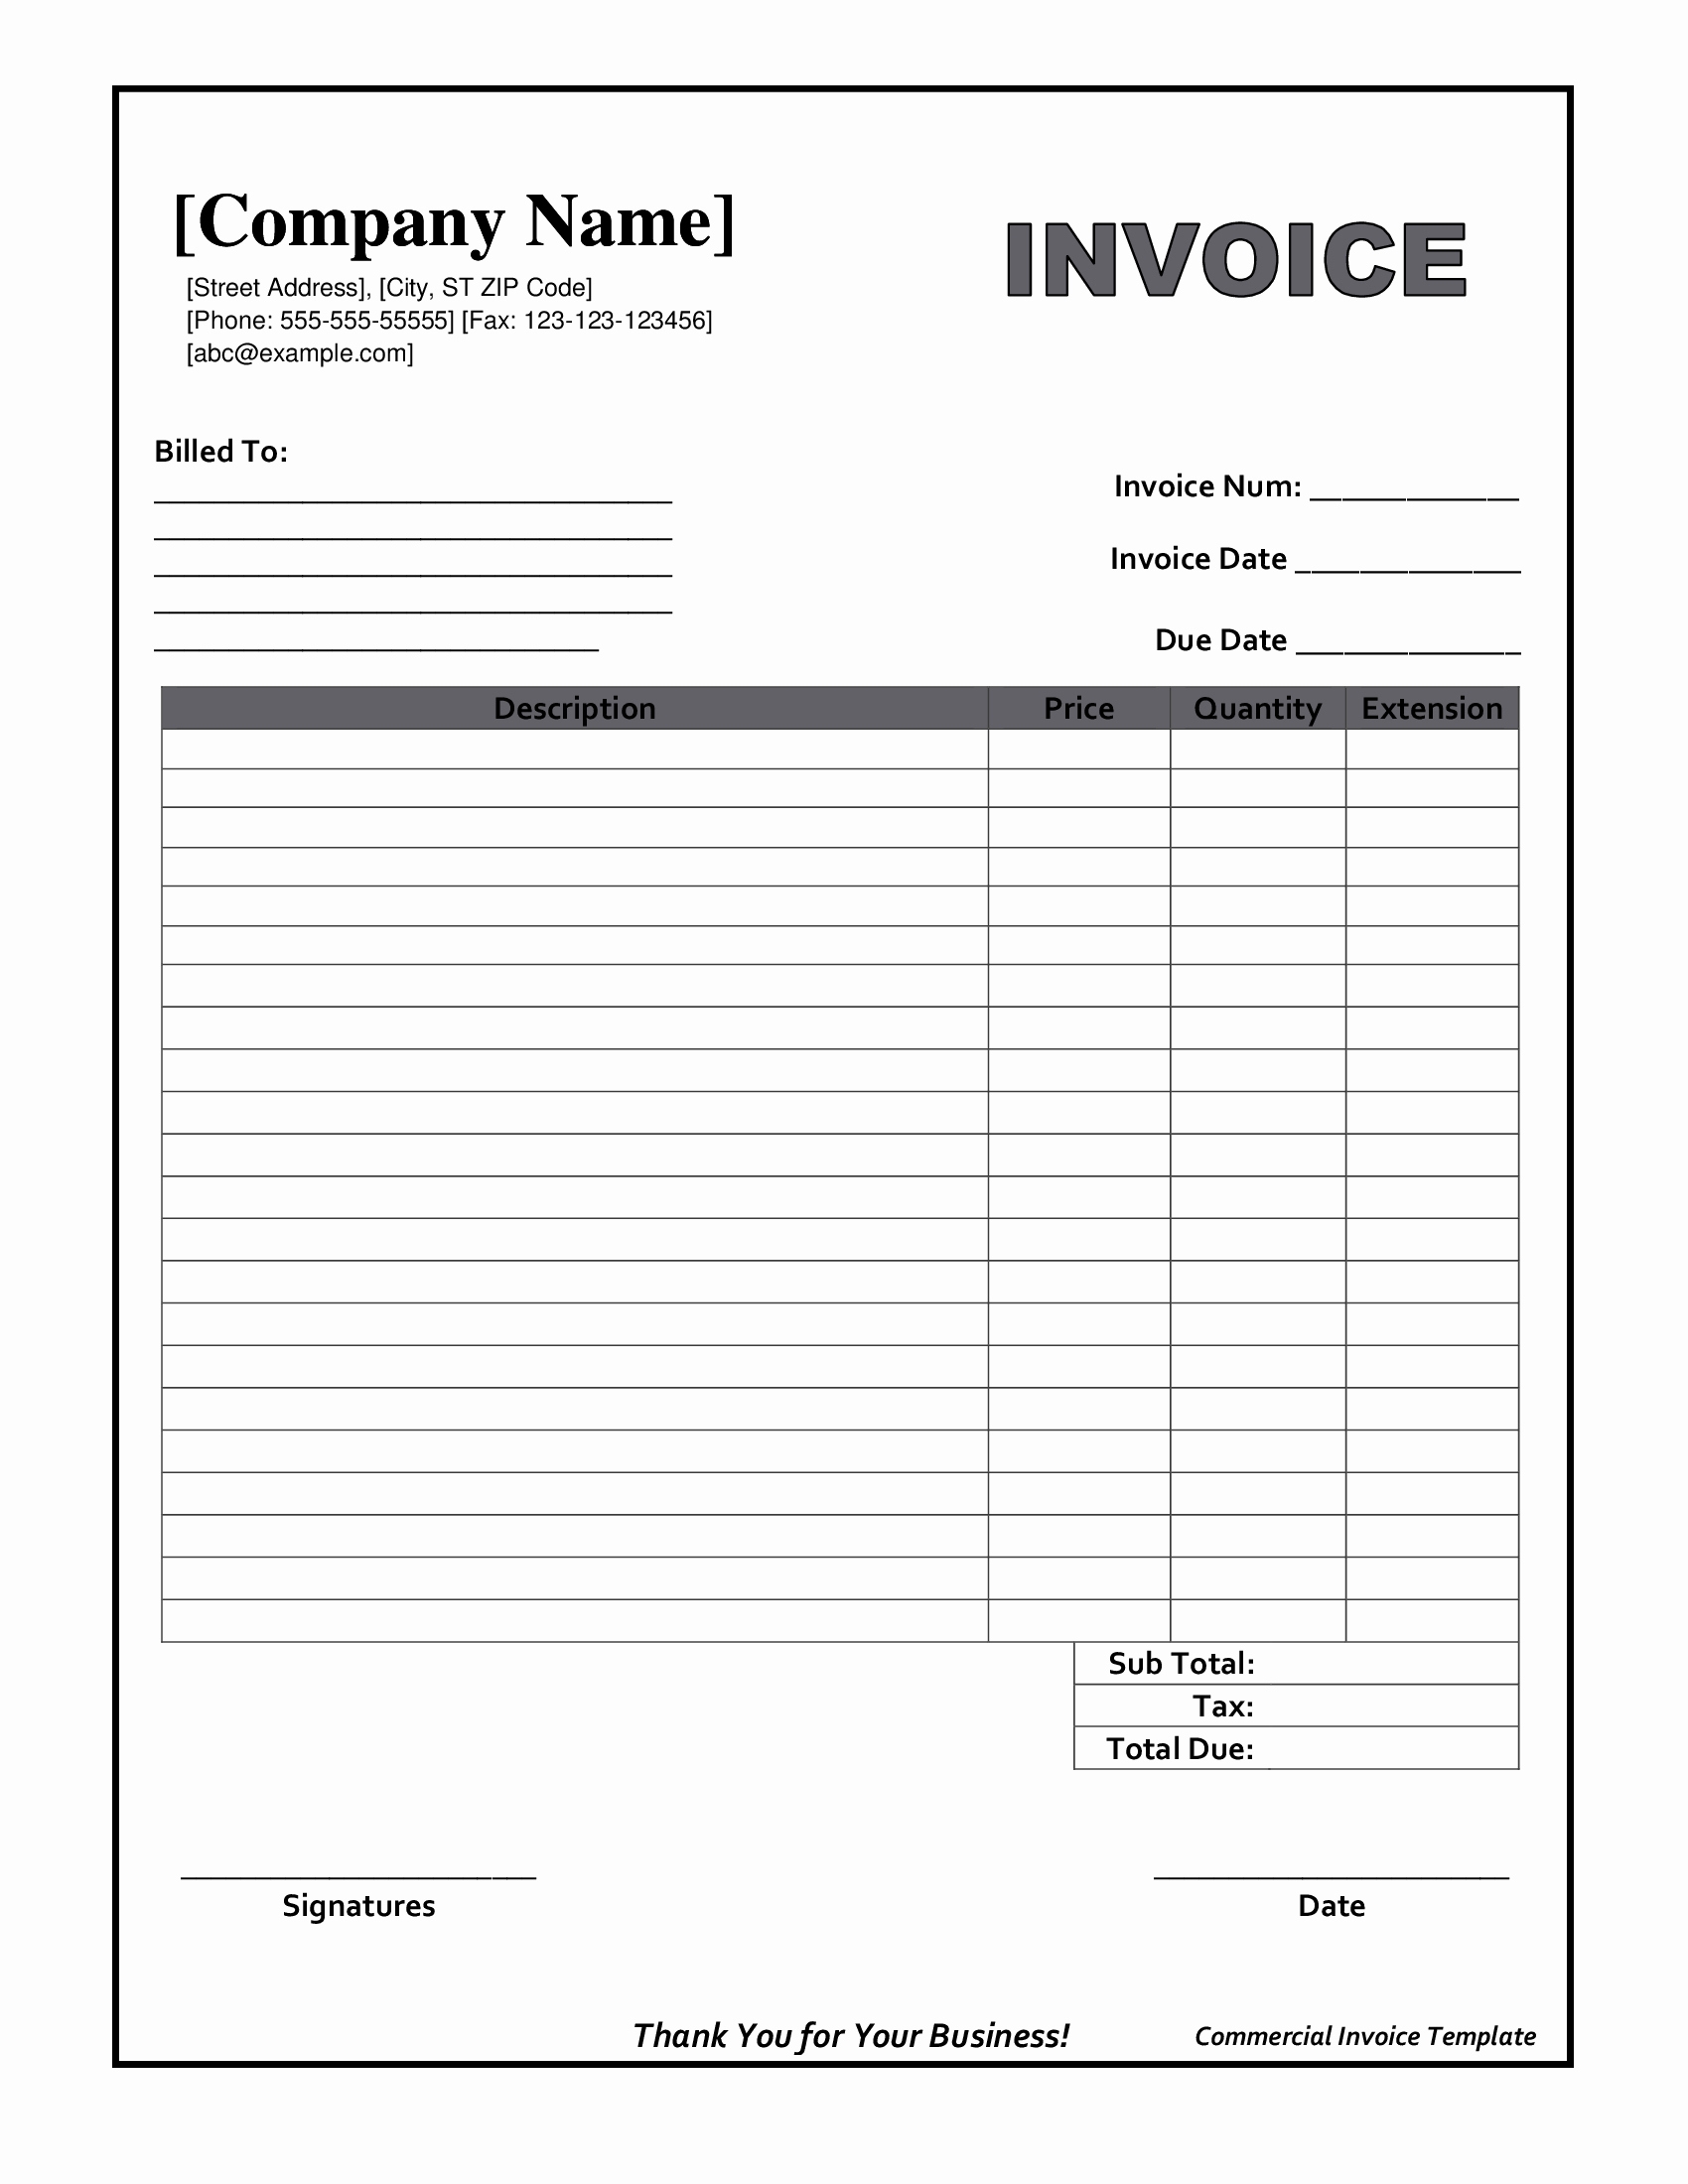 free printable blank invoice form forms to print ndash fill in and print invoices